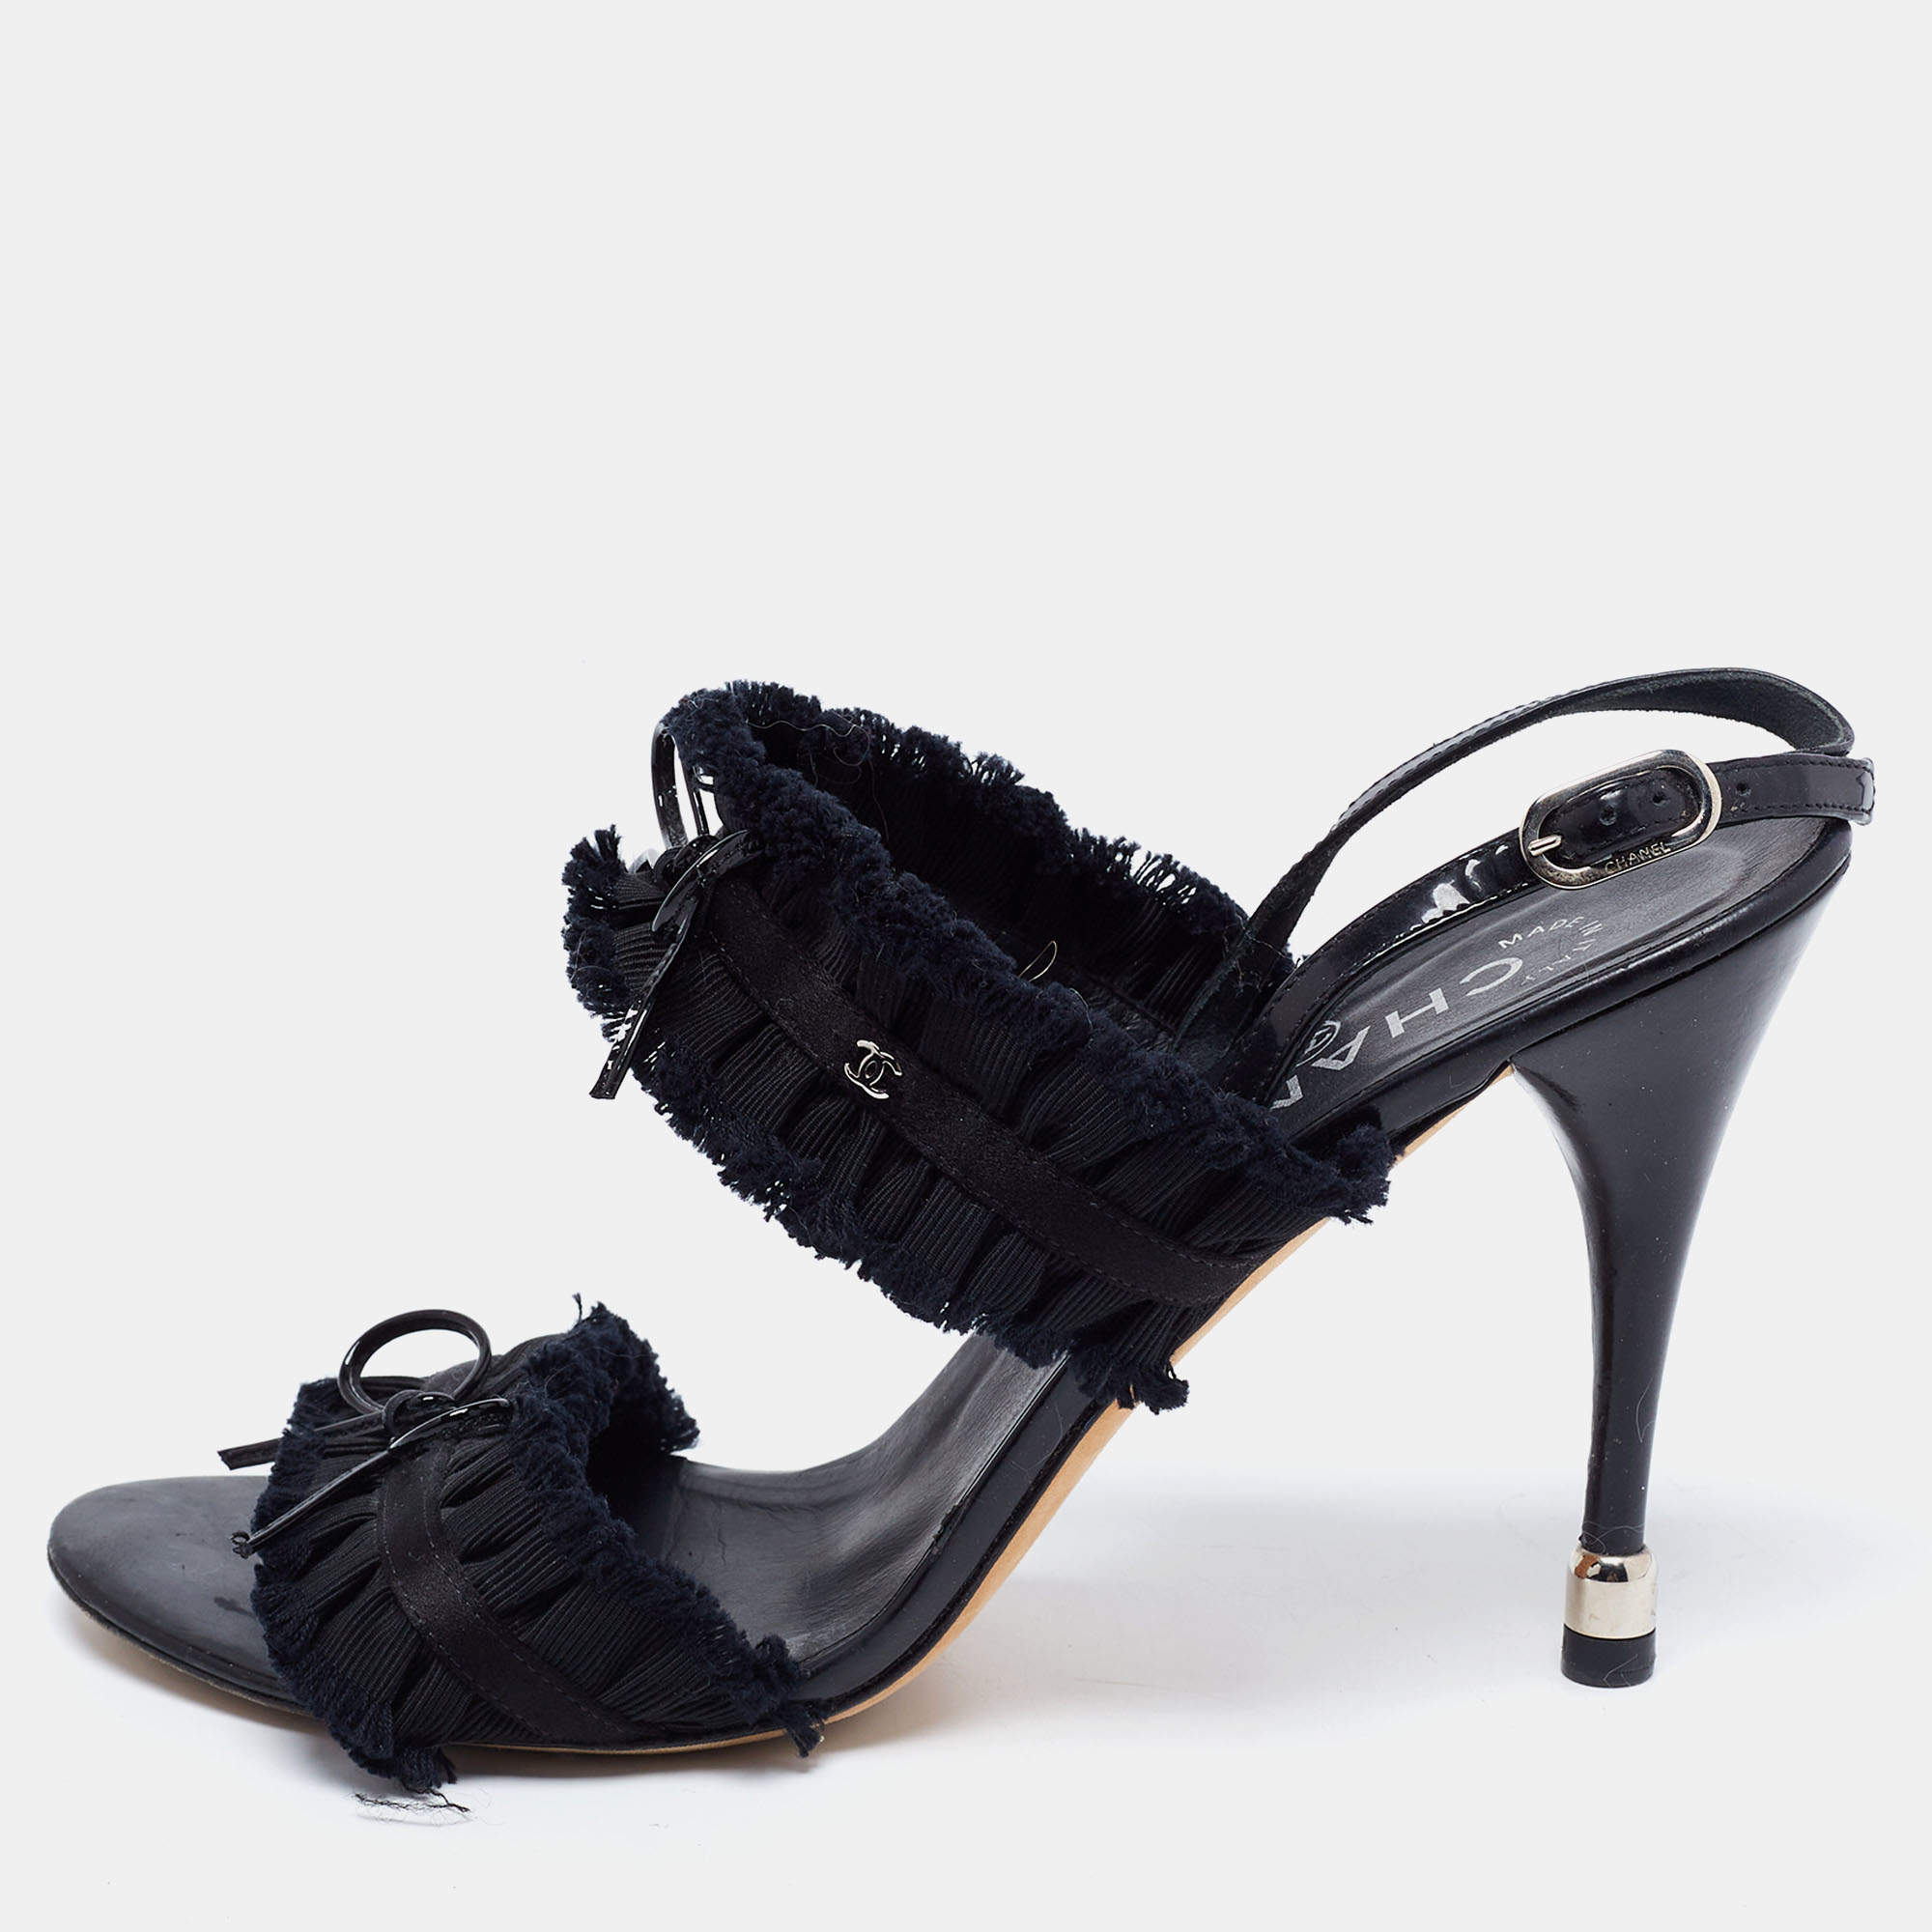 Chanel Black Satin and Fabric Ruffle Trim Bow Ankle Strap Sandals Size 38.5